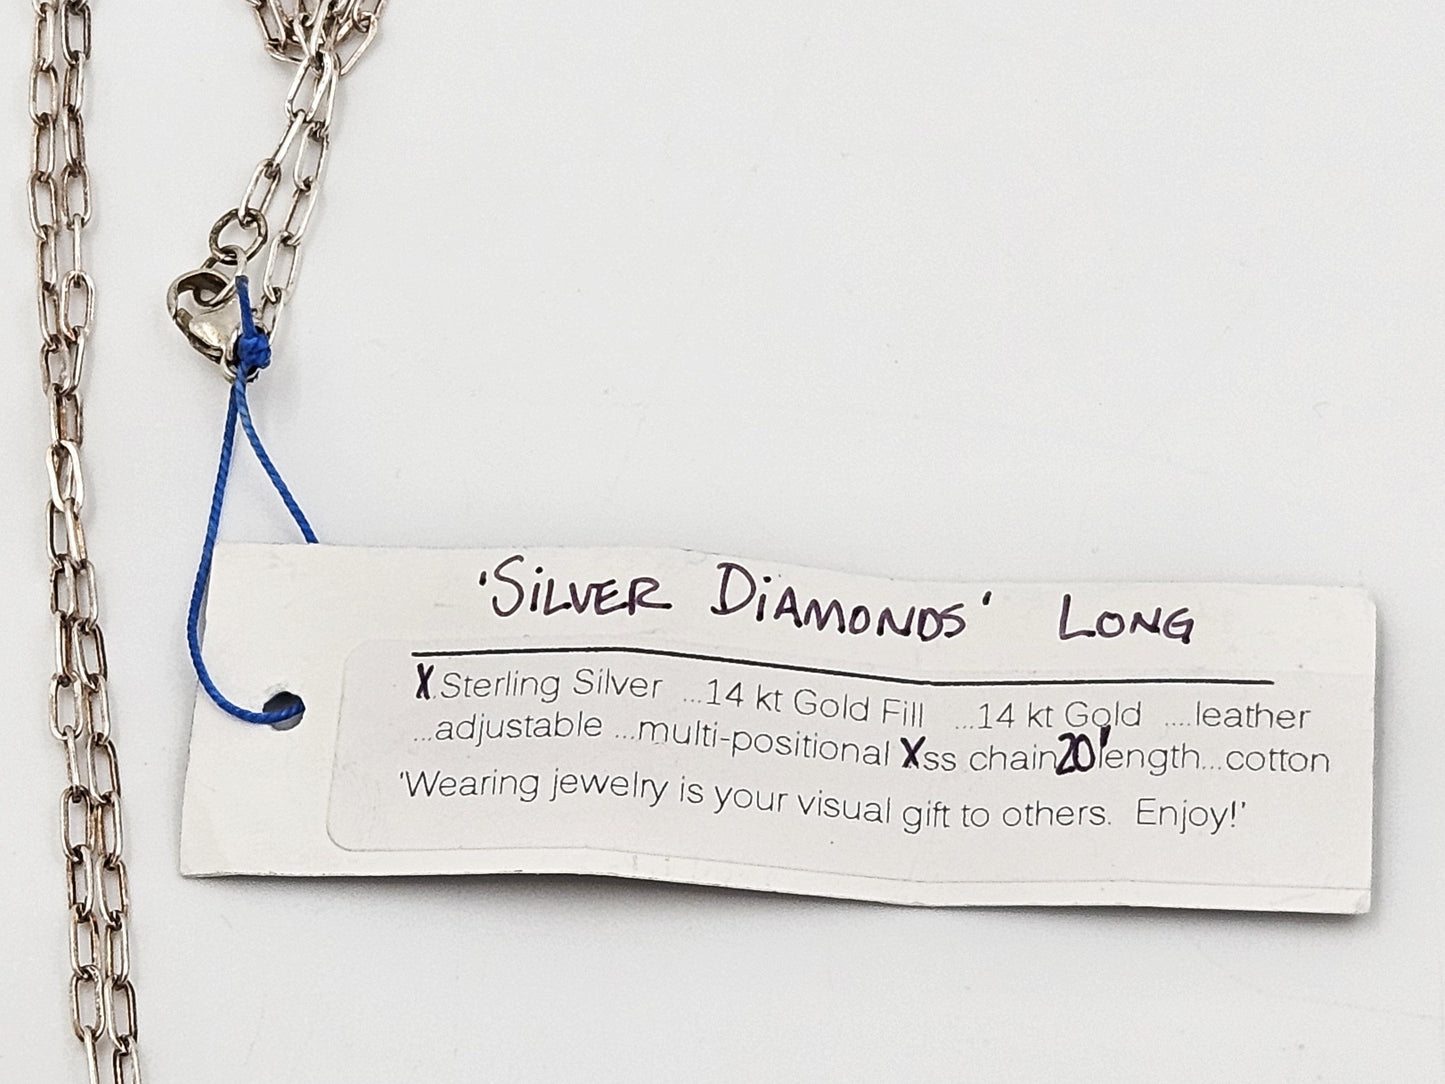 Susan Fischer Hayes Jewelry Sterling Silver Designer Susan Fischer Hayes "Silver Diamonds" Necklace with Tag